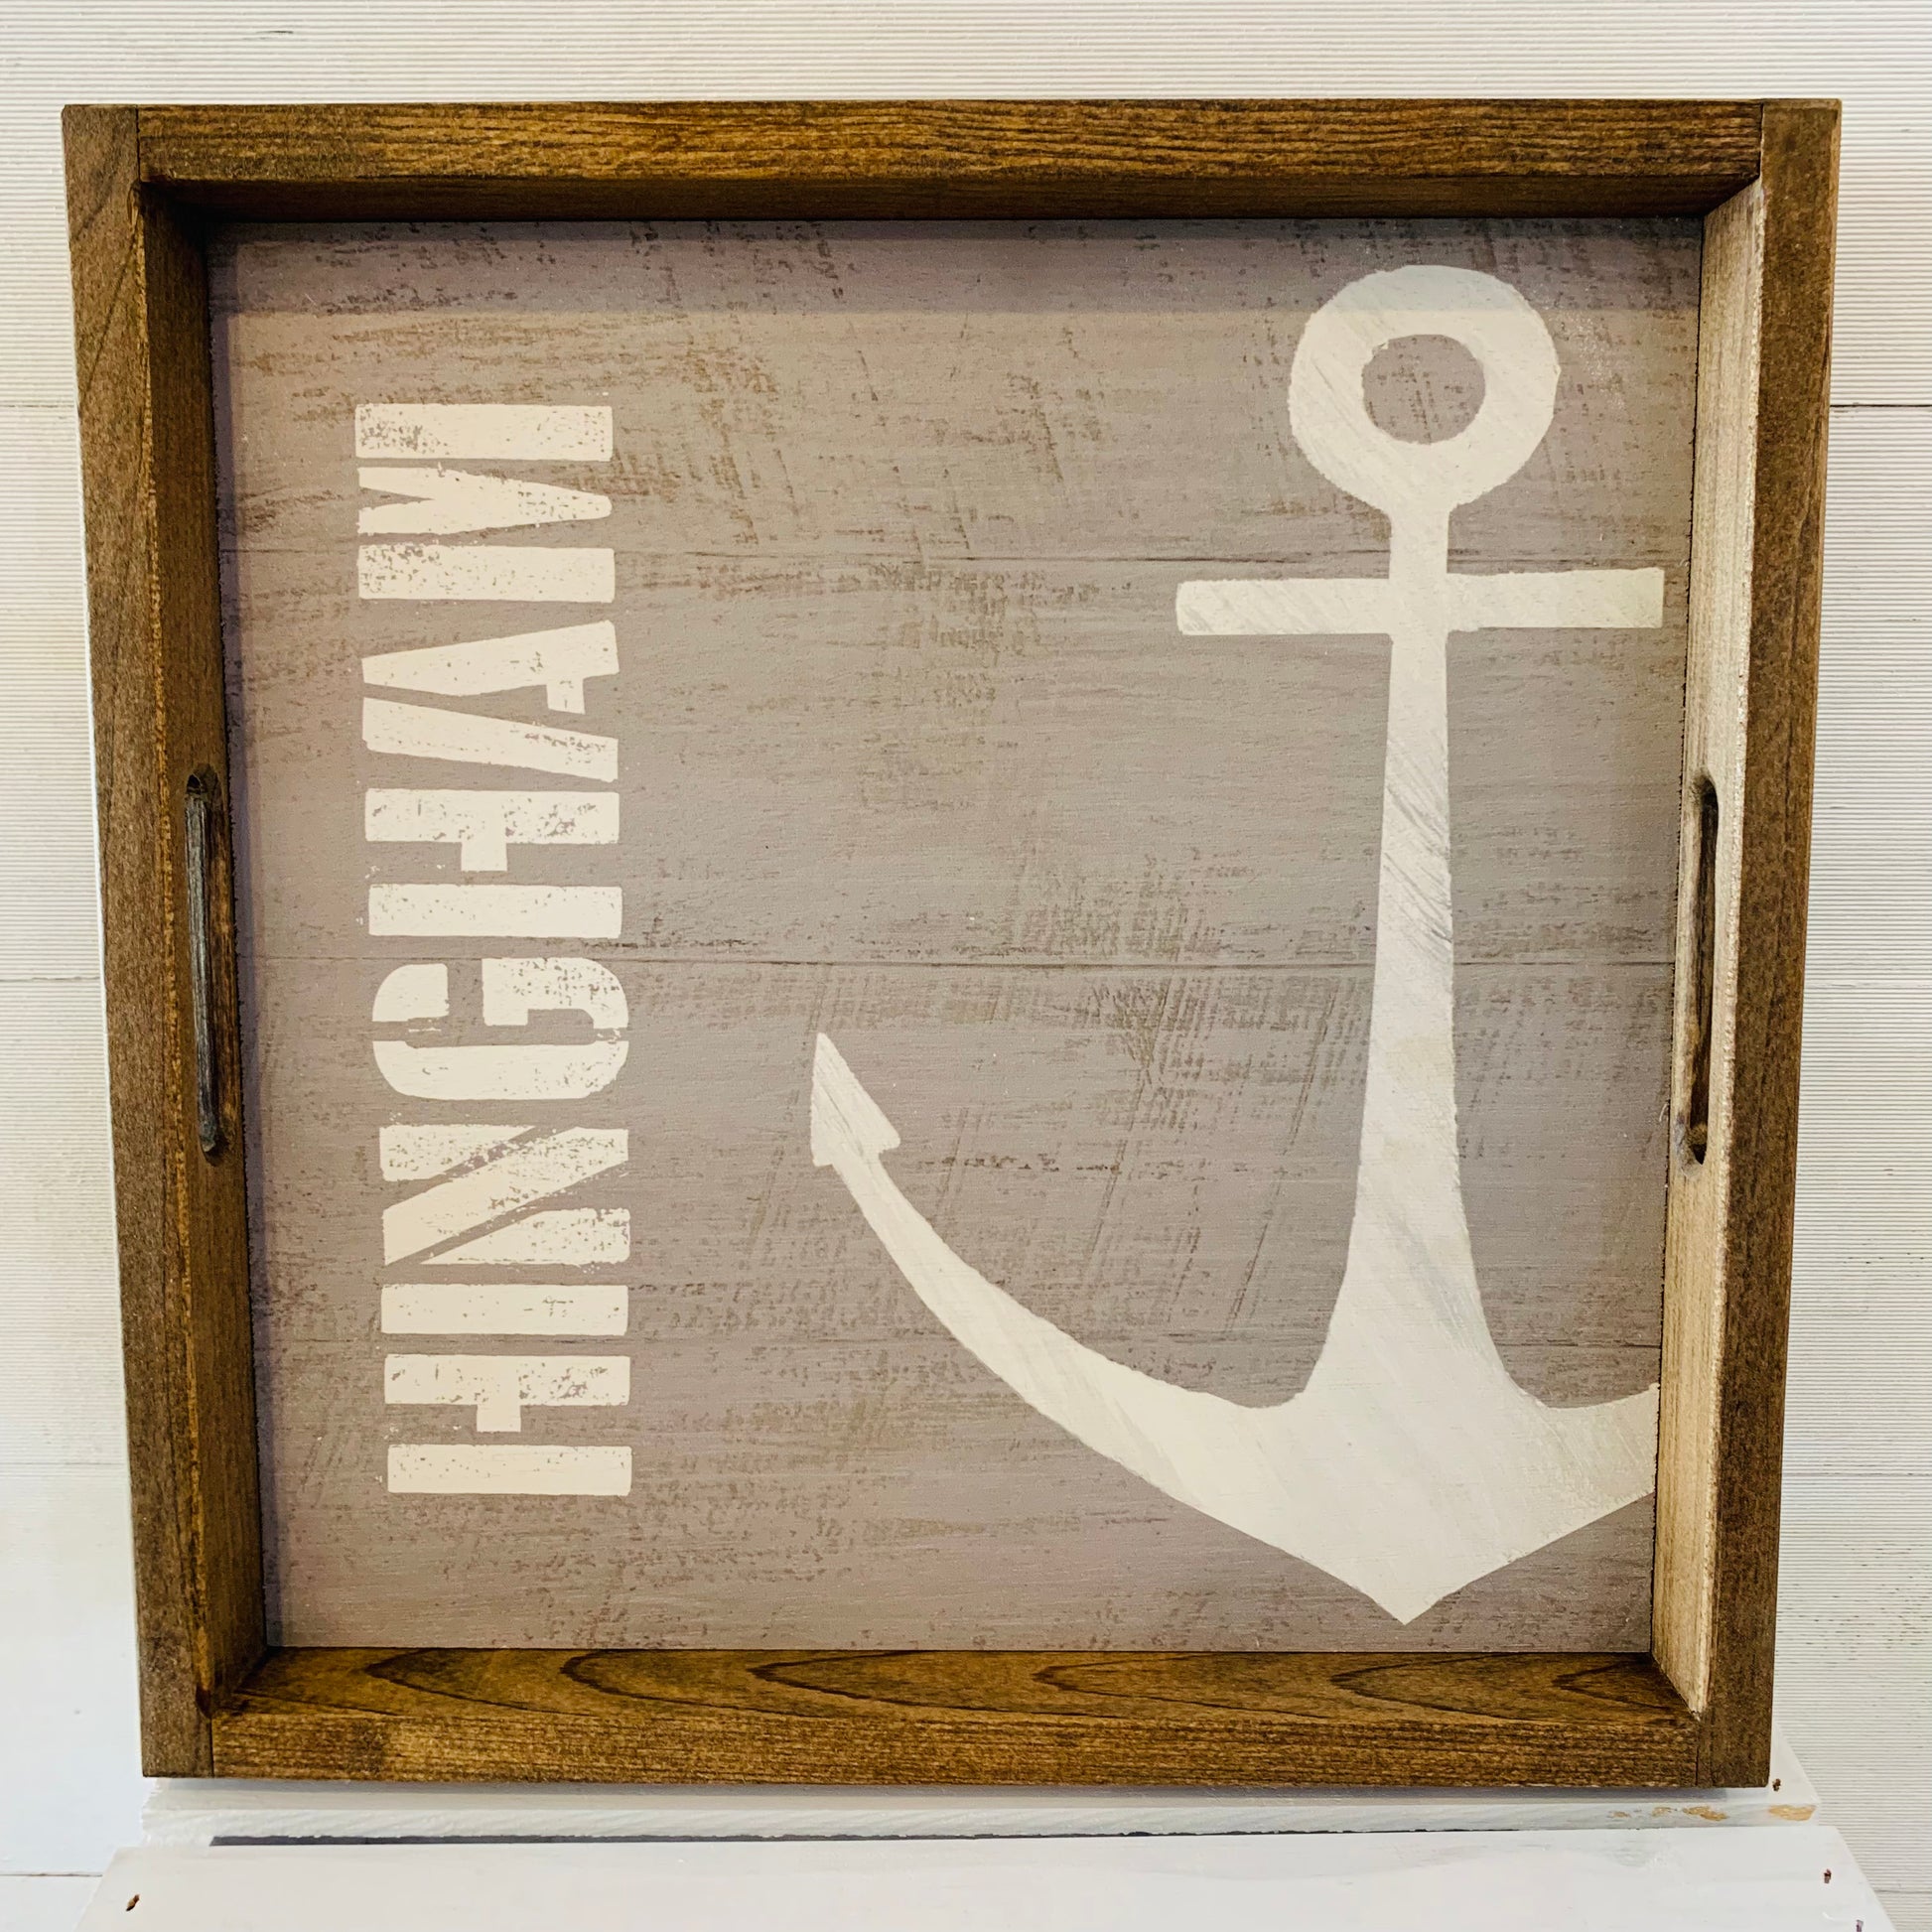 square wooden tray with gray background the word HINGHAM vertical on left and an anchor on right